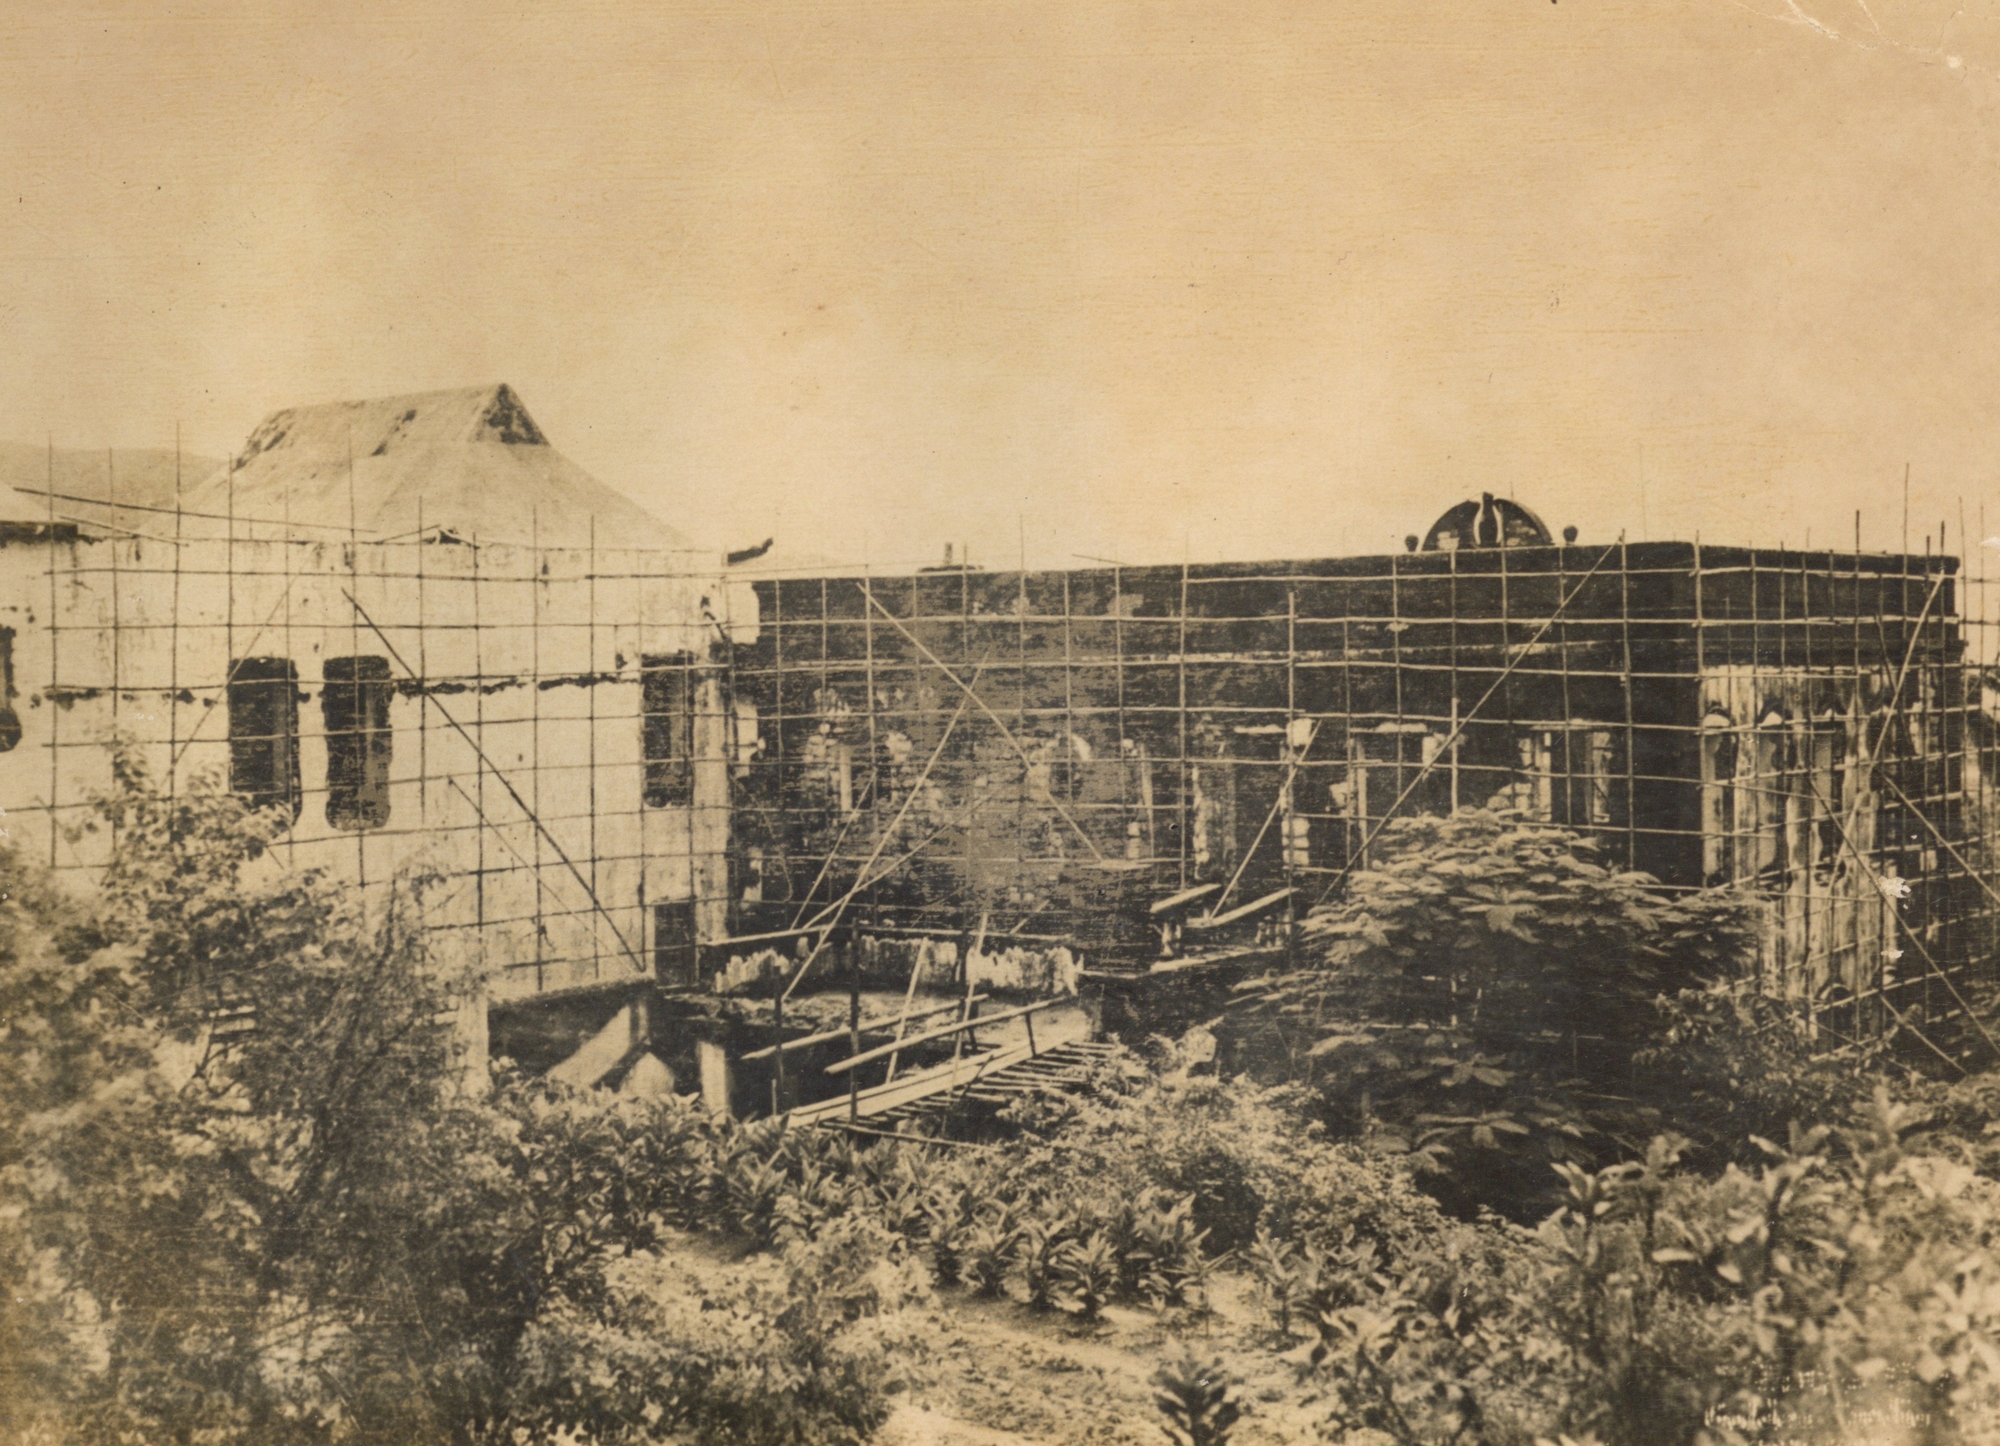 Photo taken at the back of the main building reviewing the devastation  during Japanese Occupation